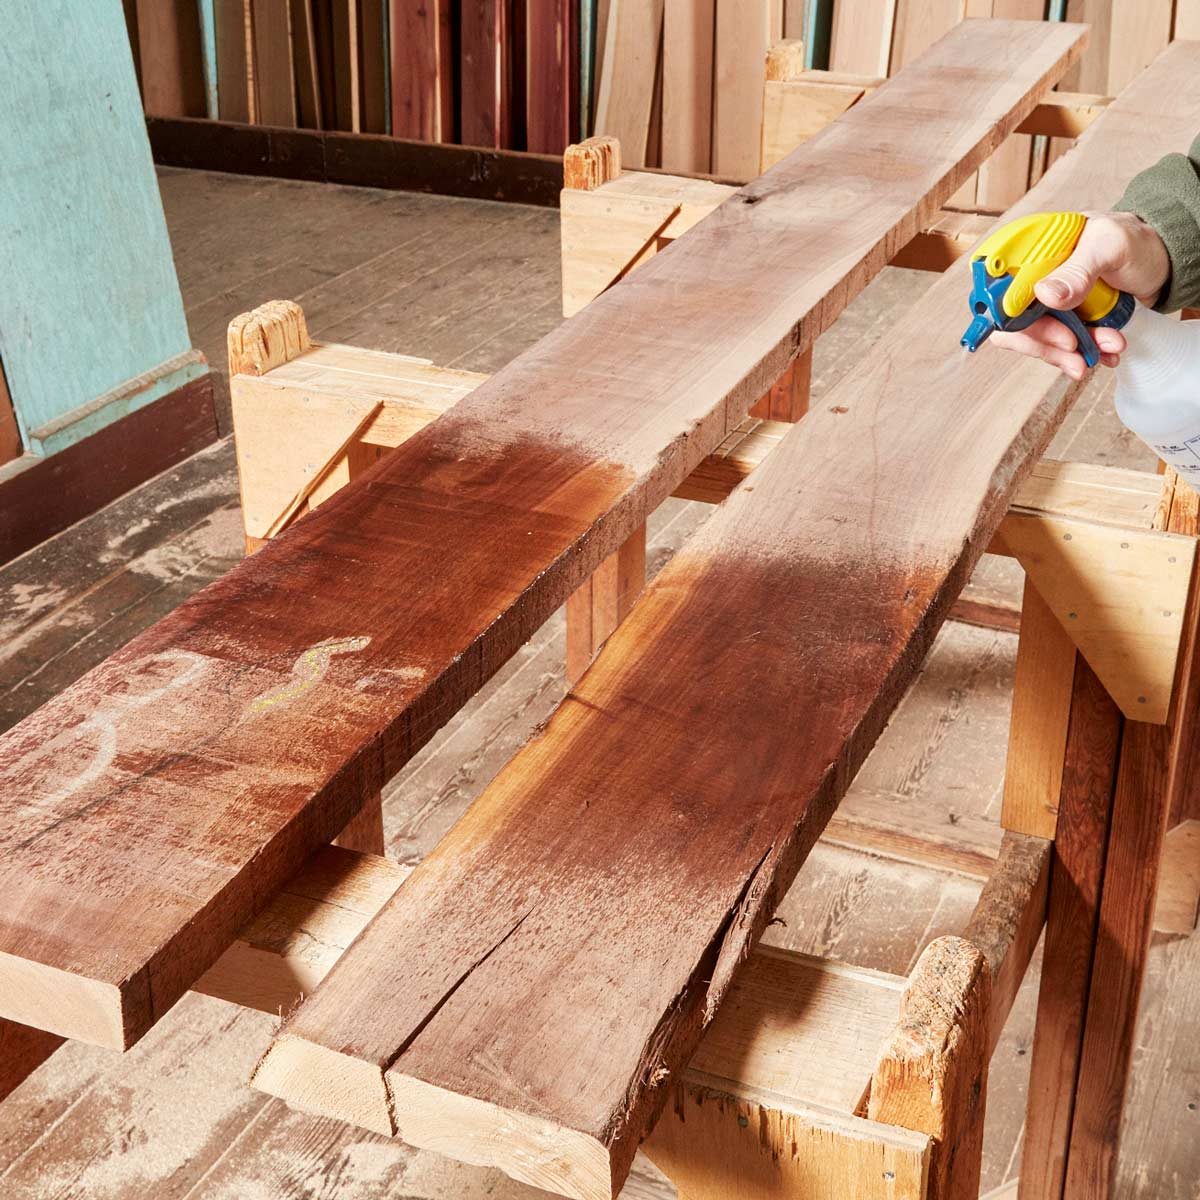 How To Buy Rough Sawn Lumber The Family Handyman